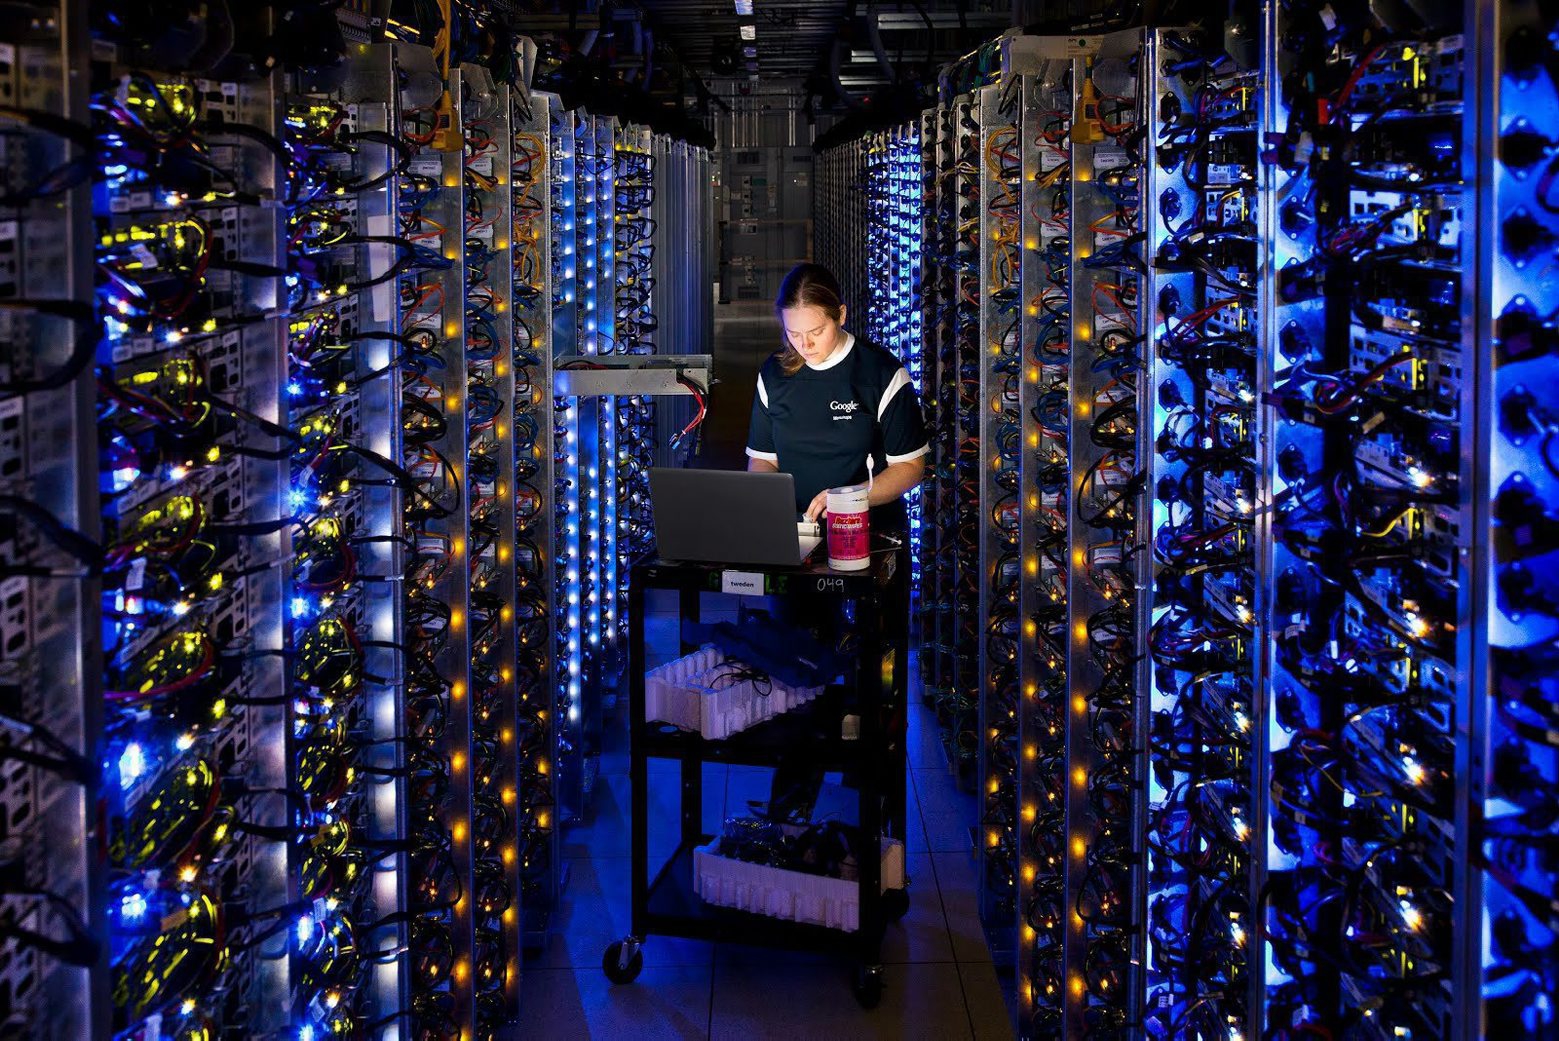 In this undated photo made available by Google, Denise Harwood diagnoses an overheated computer processor at Googleís data center in The Dalles, Ore. Google uses these data centers to store email, photos, video, calendar entries and other information shared by its users. These centers also process the hundreds of millions of searches that Internet users make on Google each day. (AP Photo/Google, Connie Zhou) NSA Phone Records Big Data Photo Gallery